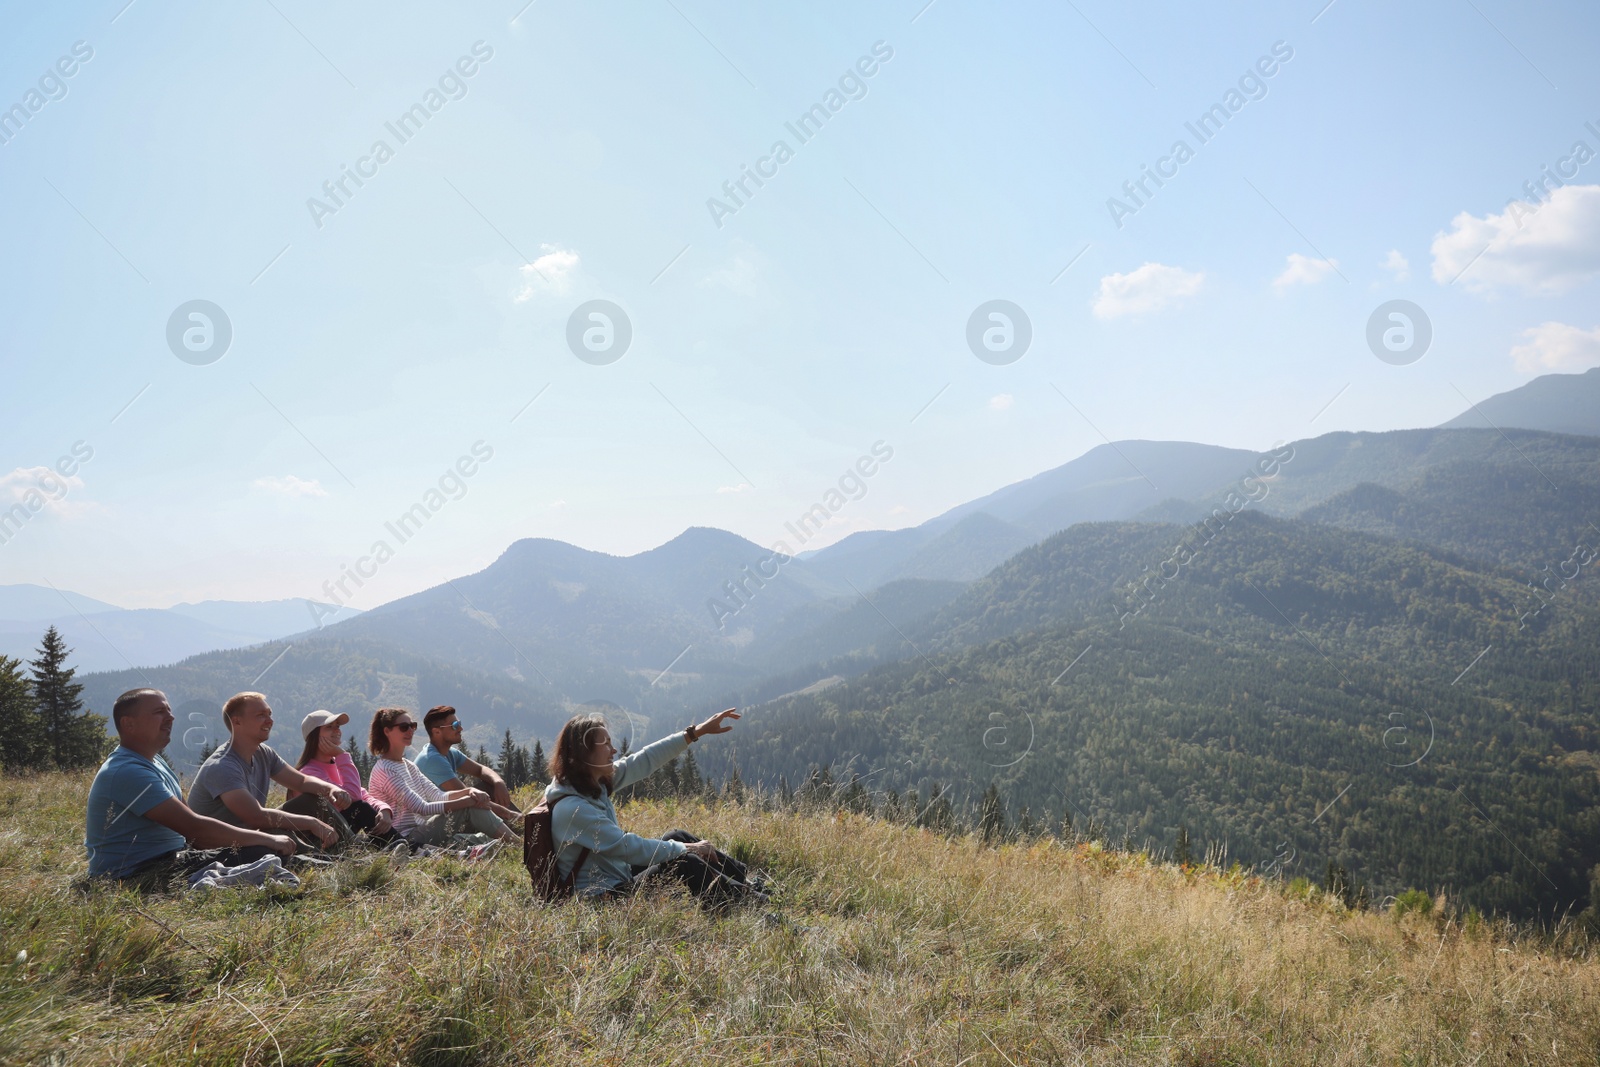 Photo of Group of people spending time together in mountains. Space for text